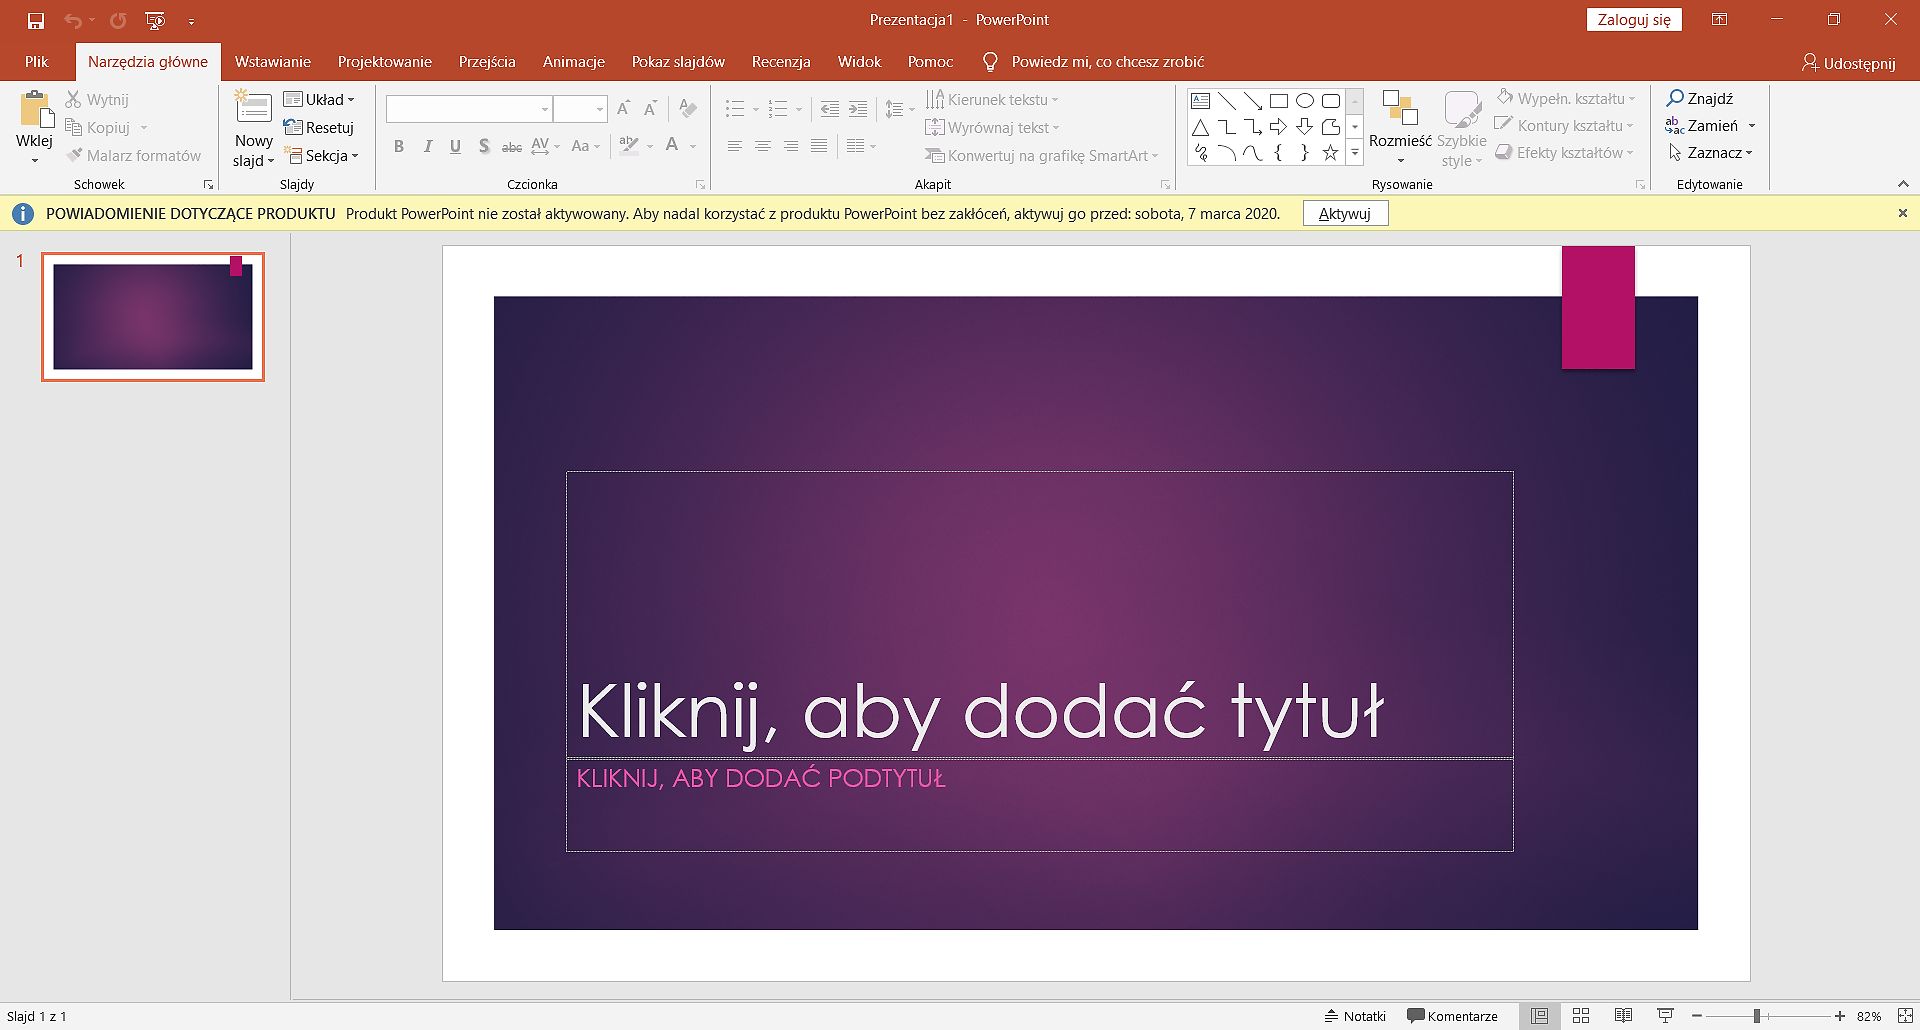 microsoft powerpoint 2019 free download for windows 10